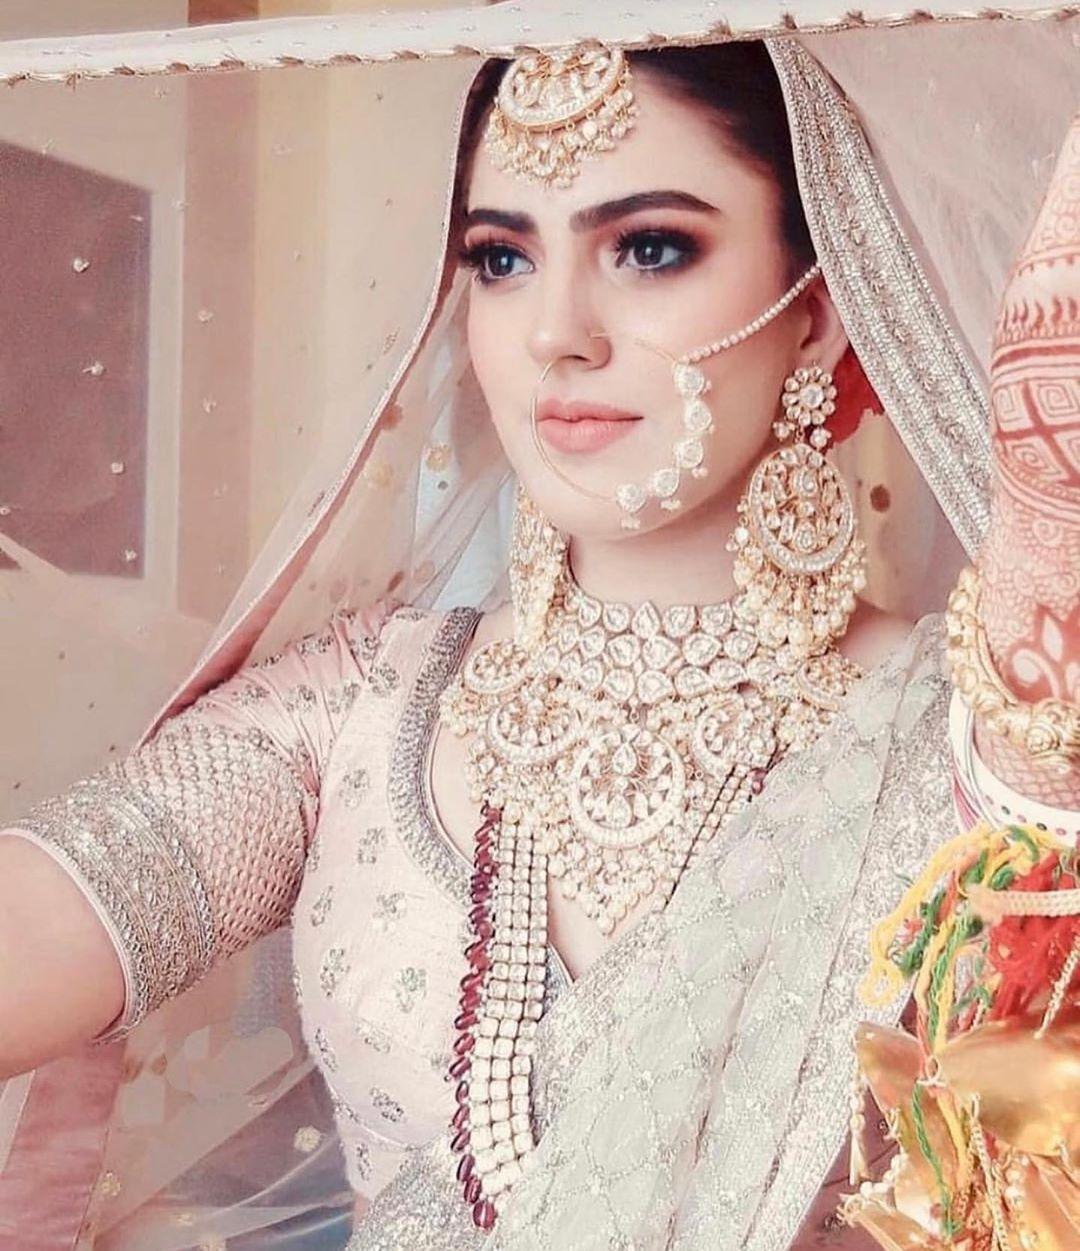 15 Sikh Brides Who Styled Their Looks Differently | Sikh bride, Couple wedding  dress, Sikh wedding photography